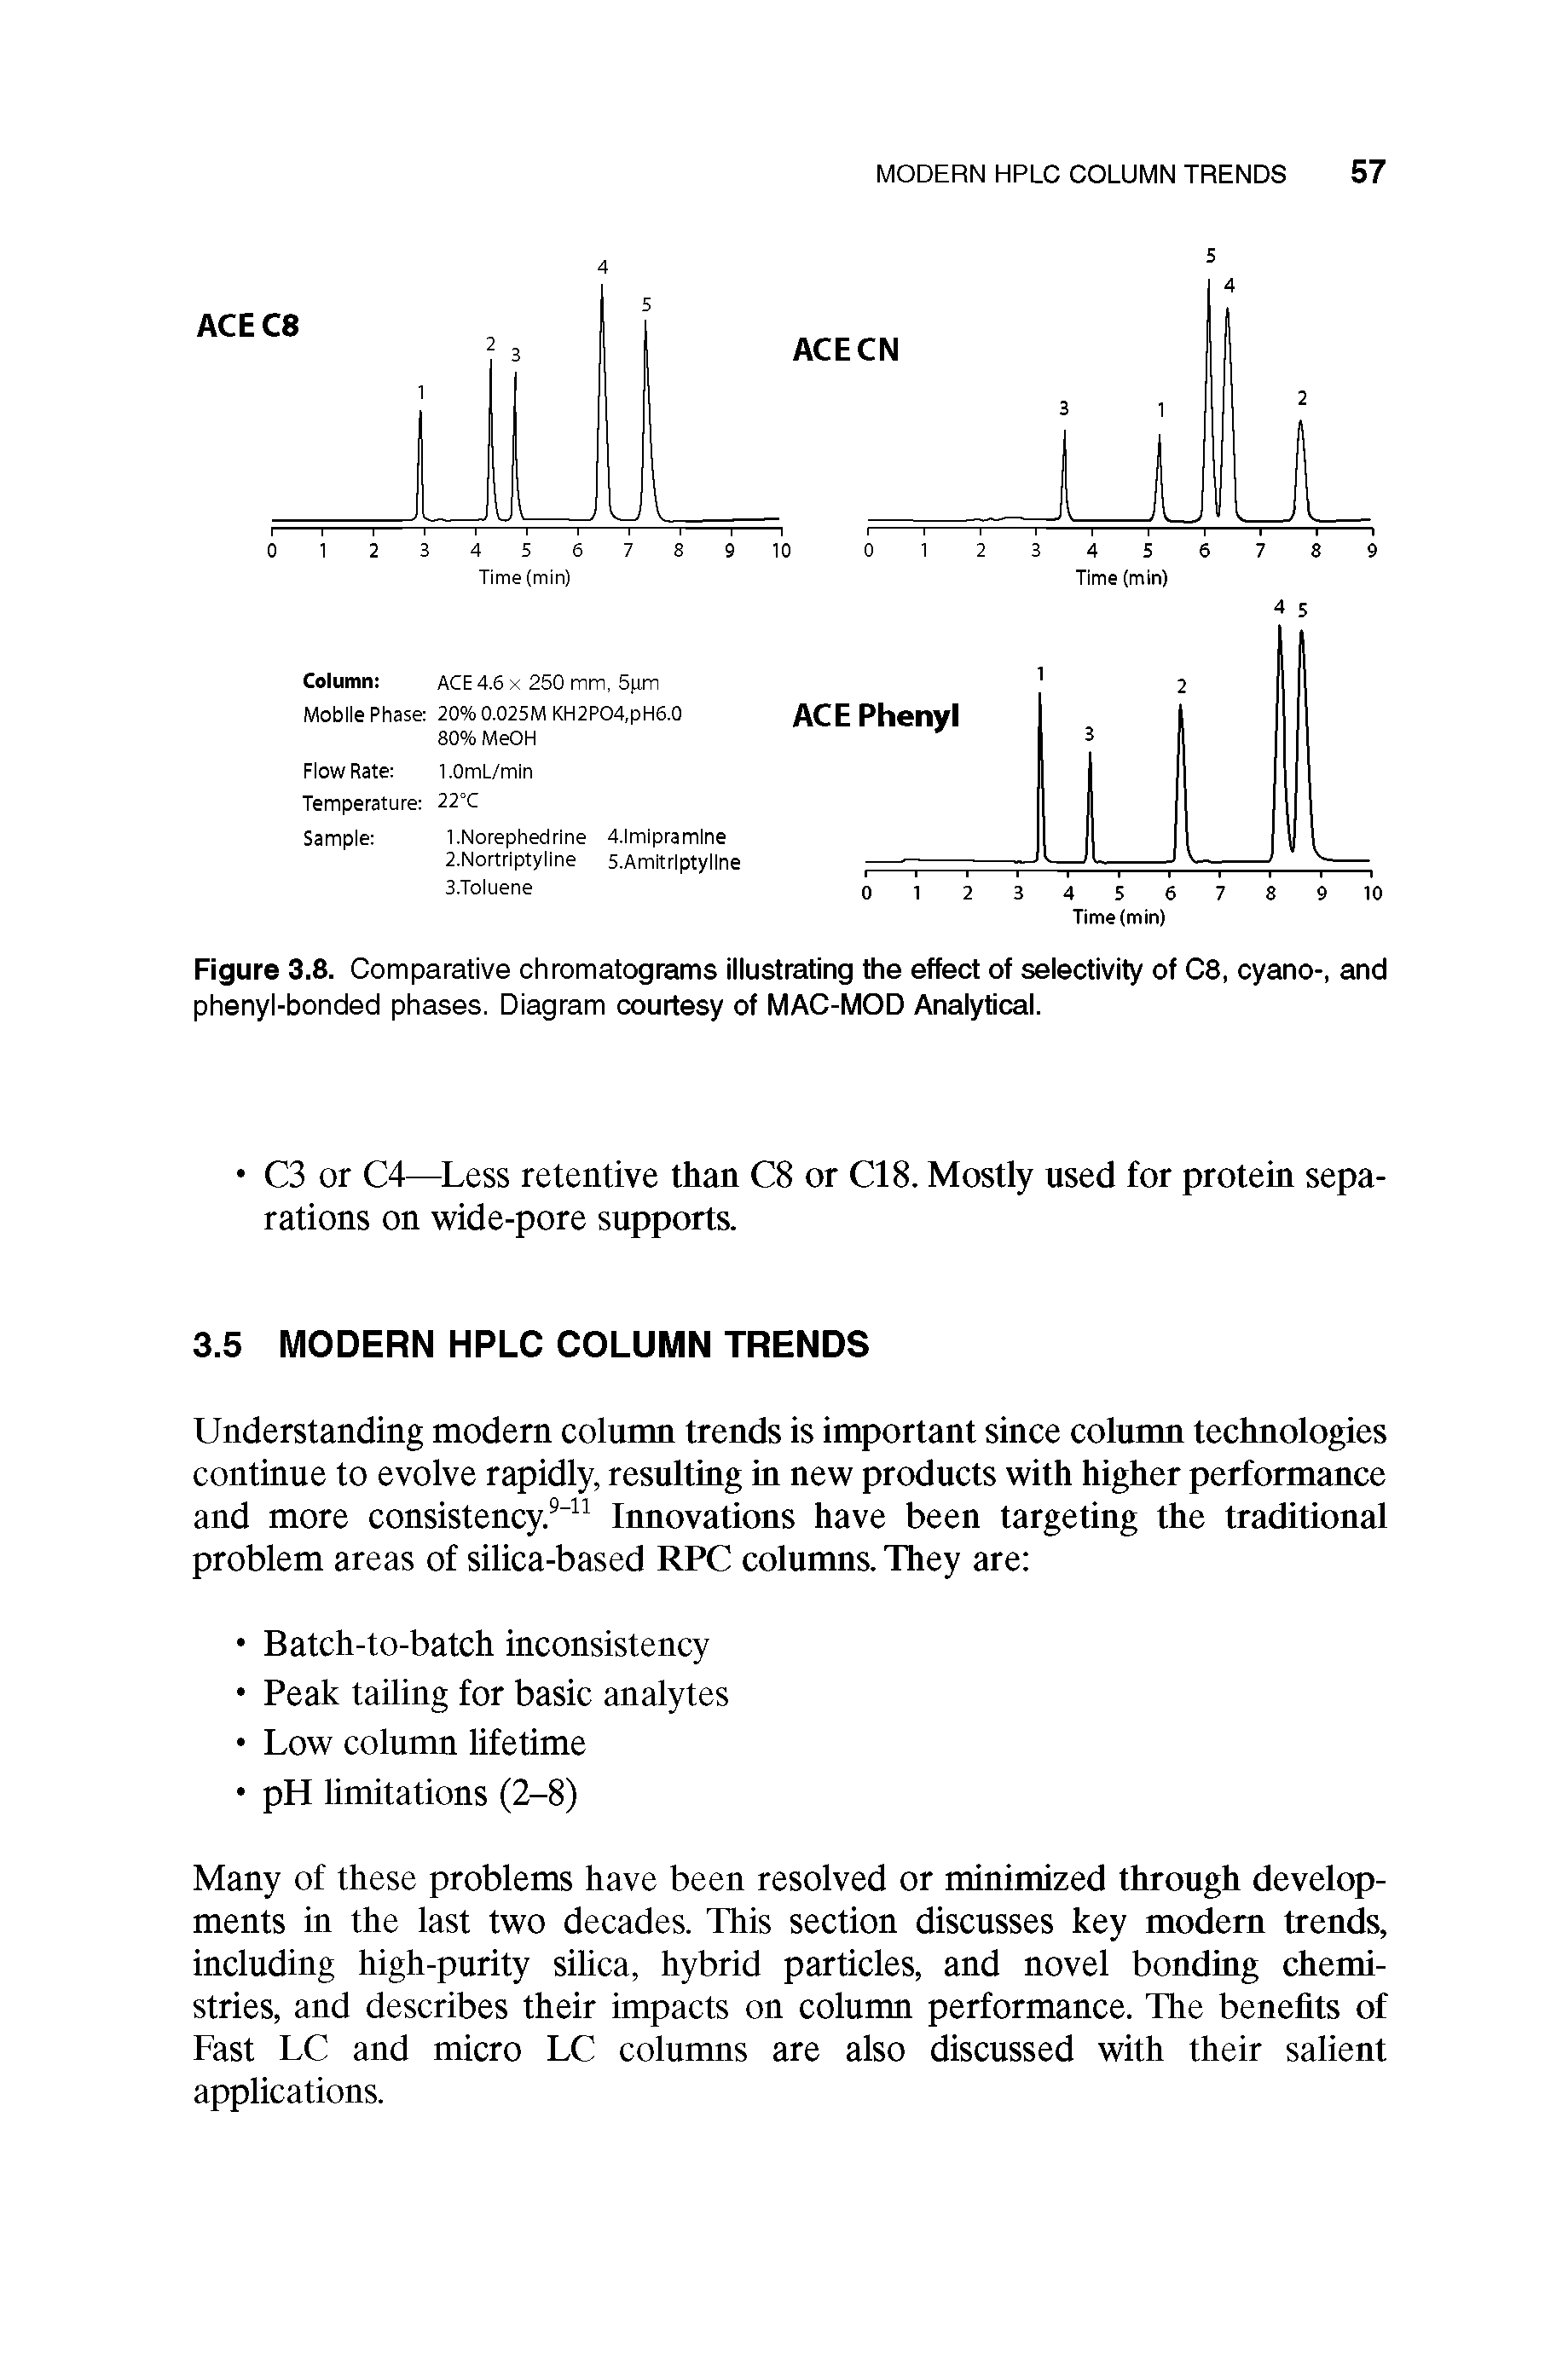 Figure 3.8. Comparative chromatograms illustrating the effect of selectivity of C8, cyano-, and phenyl-bonded phases. Diagram courtesy of MAC-MOD Analytical.